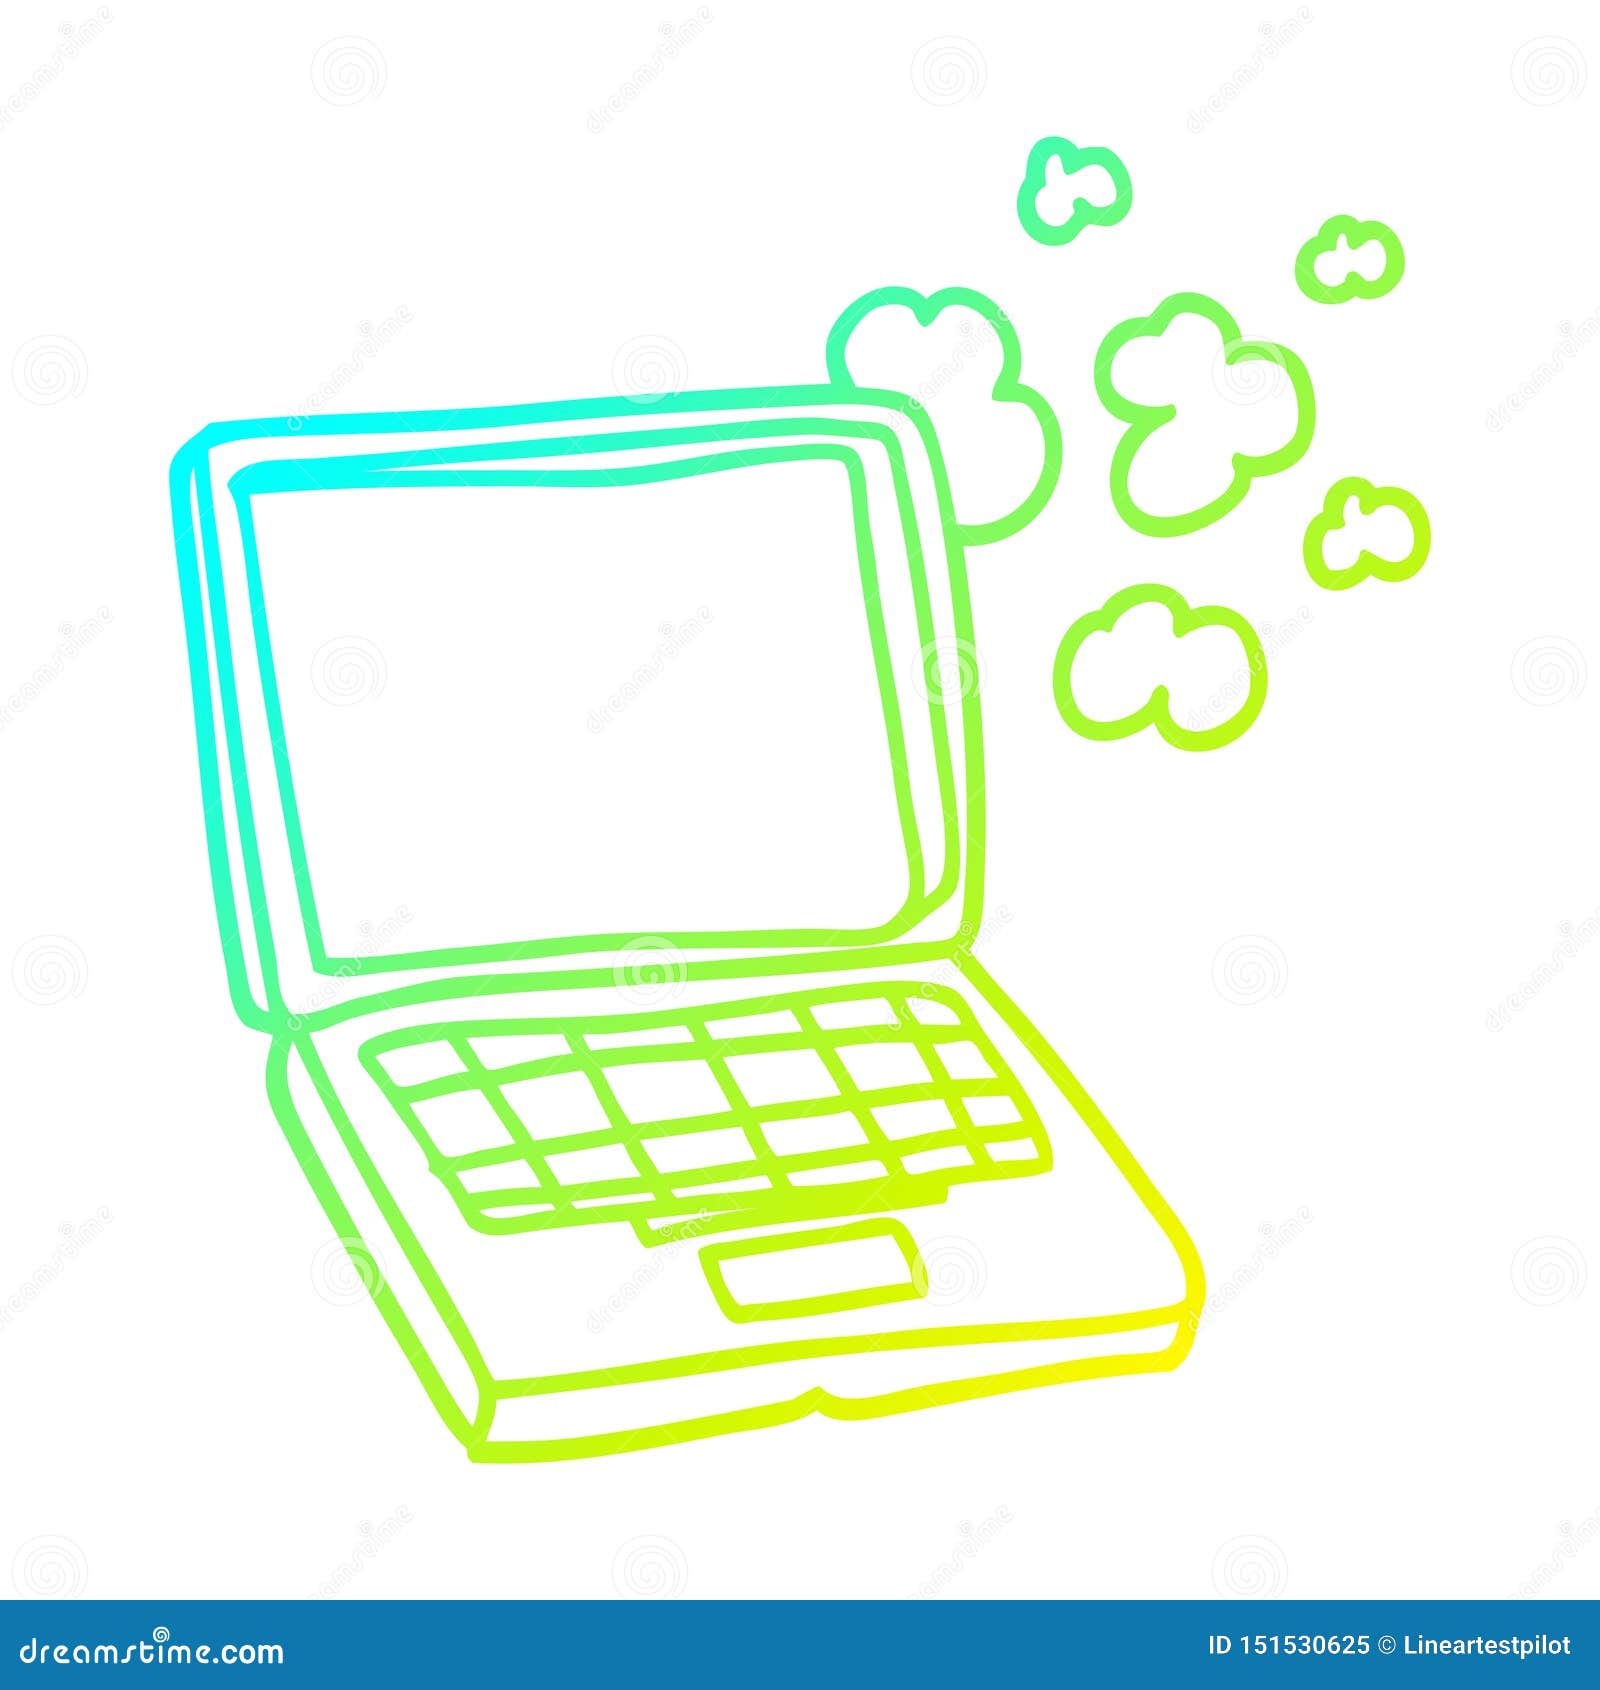 A Creative Cold Gradient Line Drawing Cartoon Laptop Computer Stock Vector  - Illustration of quirky, cute: 151530625